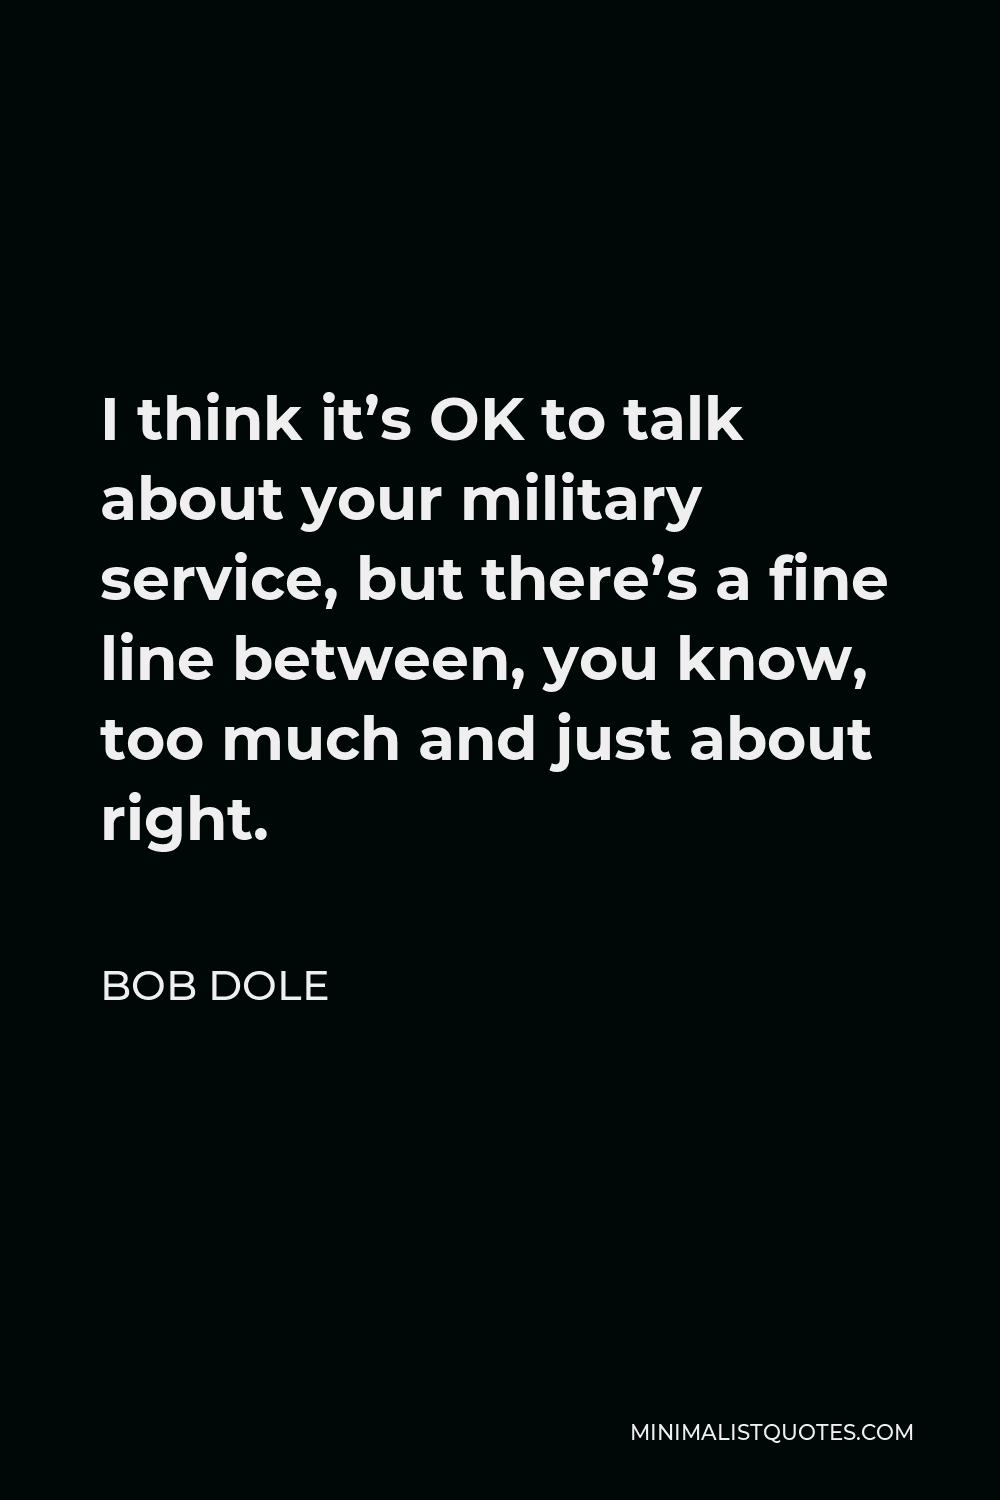 Bob Dole Quote - I think it’s OK to talk about your military service, but there’s a fine line between, you know, too much and just about right.